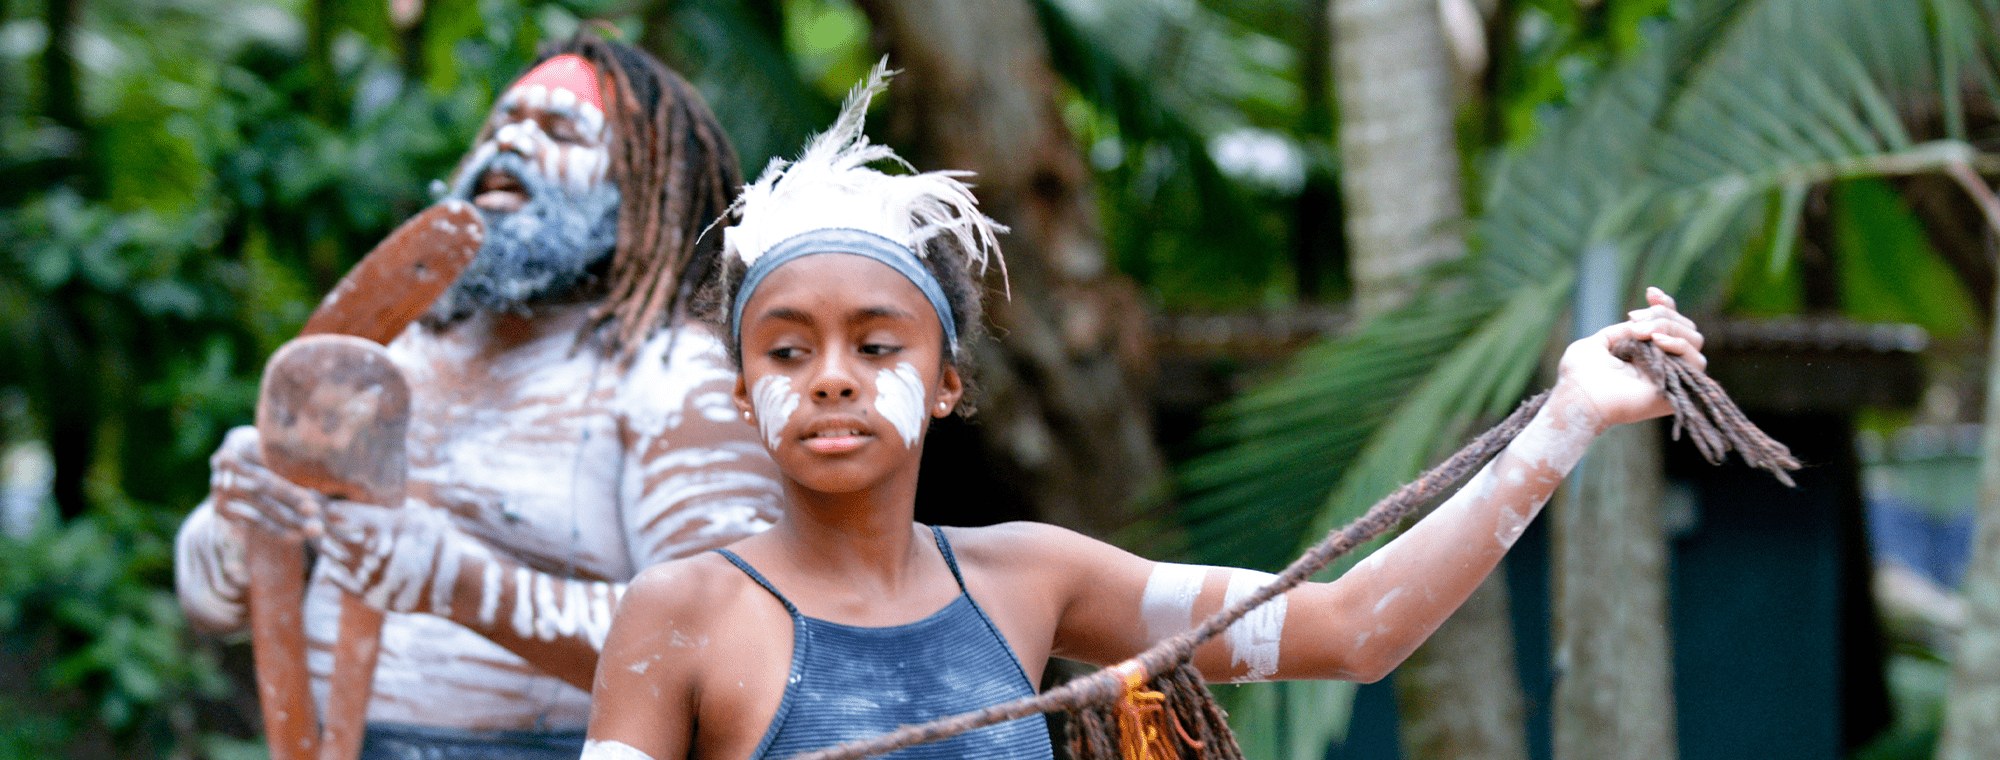 20 Facts You Should Know About Aboriginal and Torres Strait Islander Culture